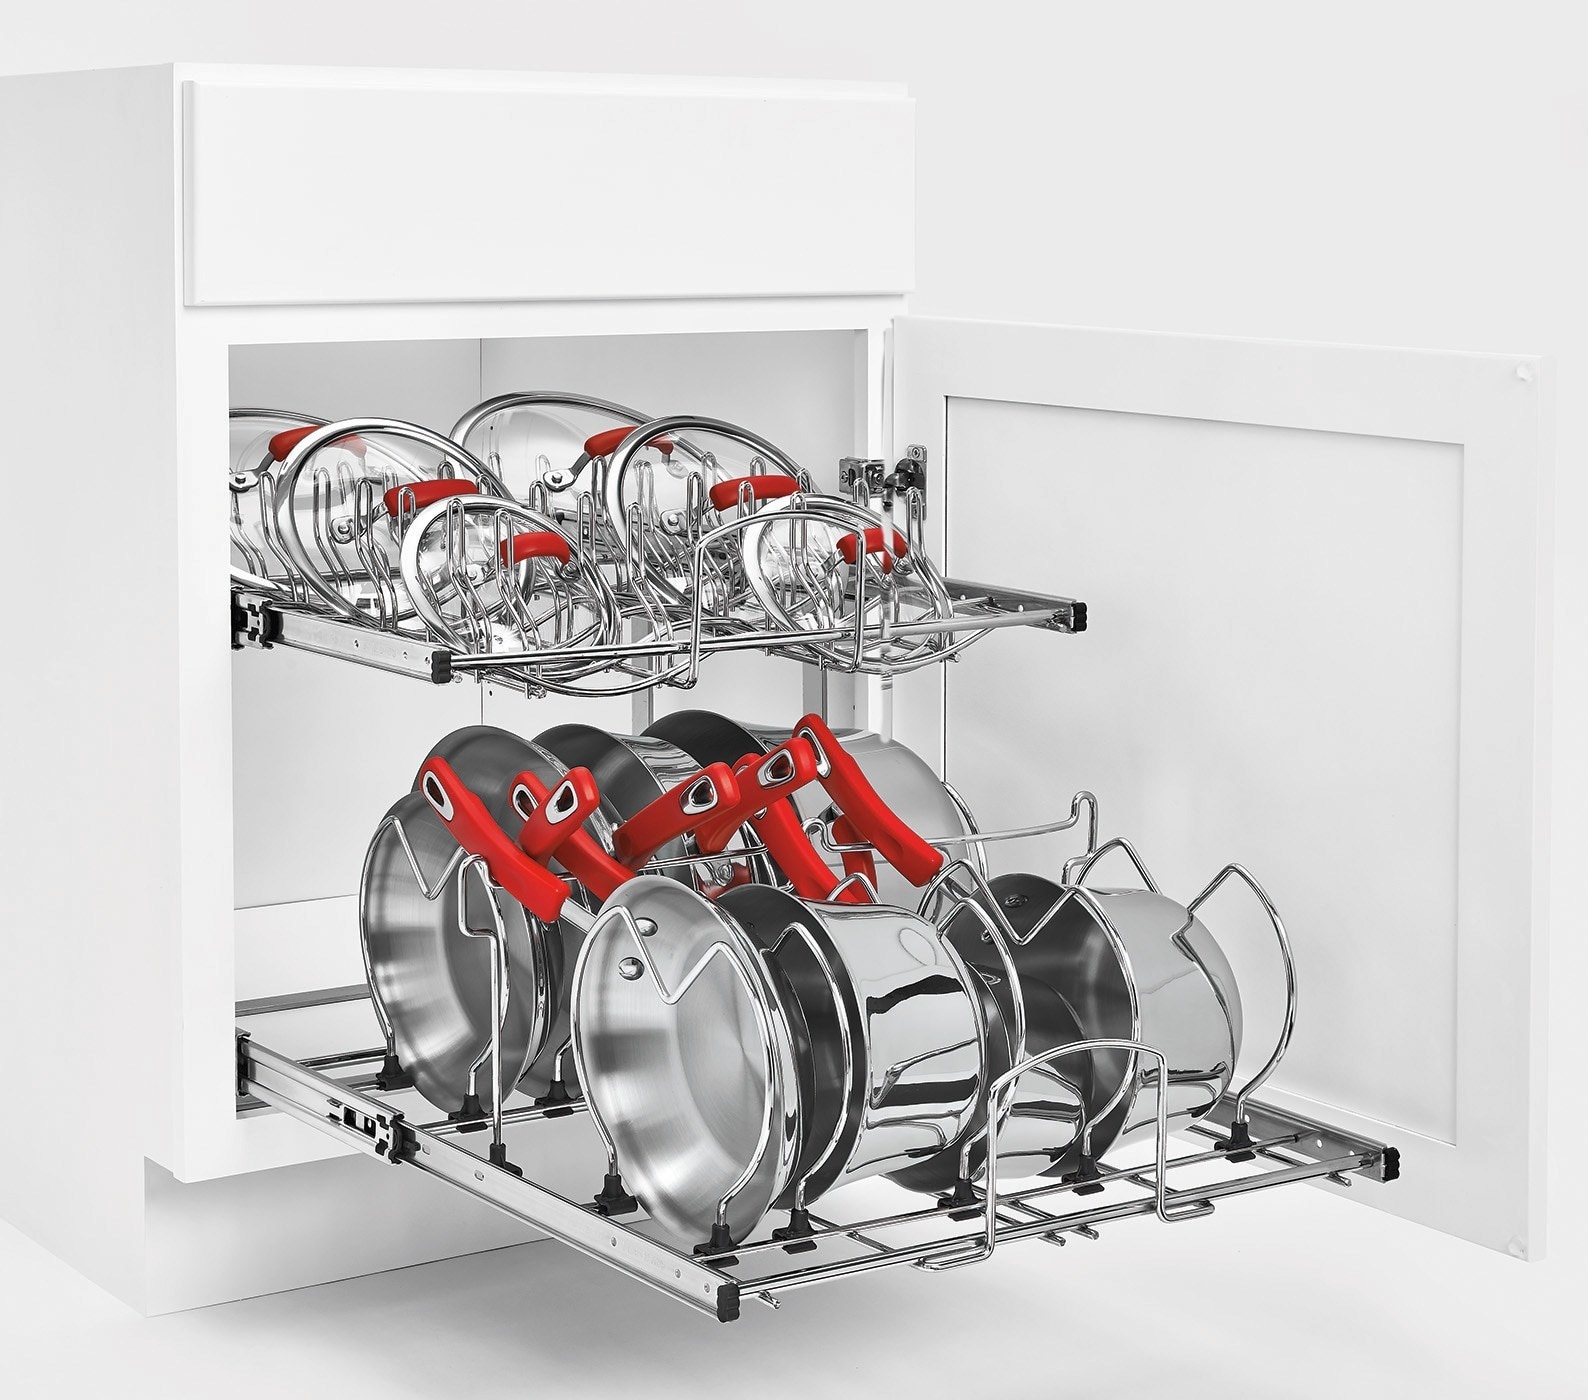 two-tier metal shelf with slots for pots and pans and lids installed in cabinet